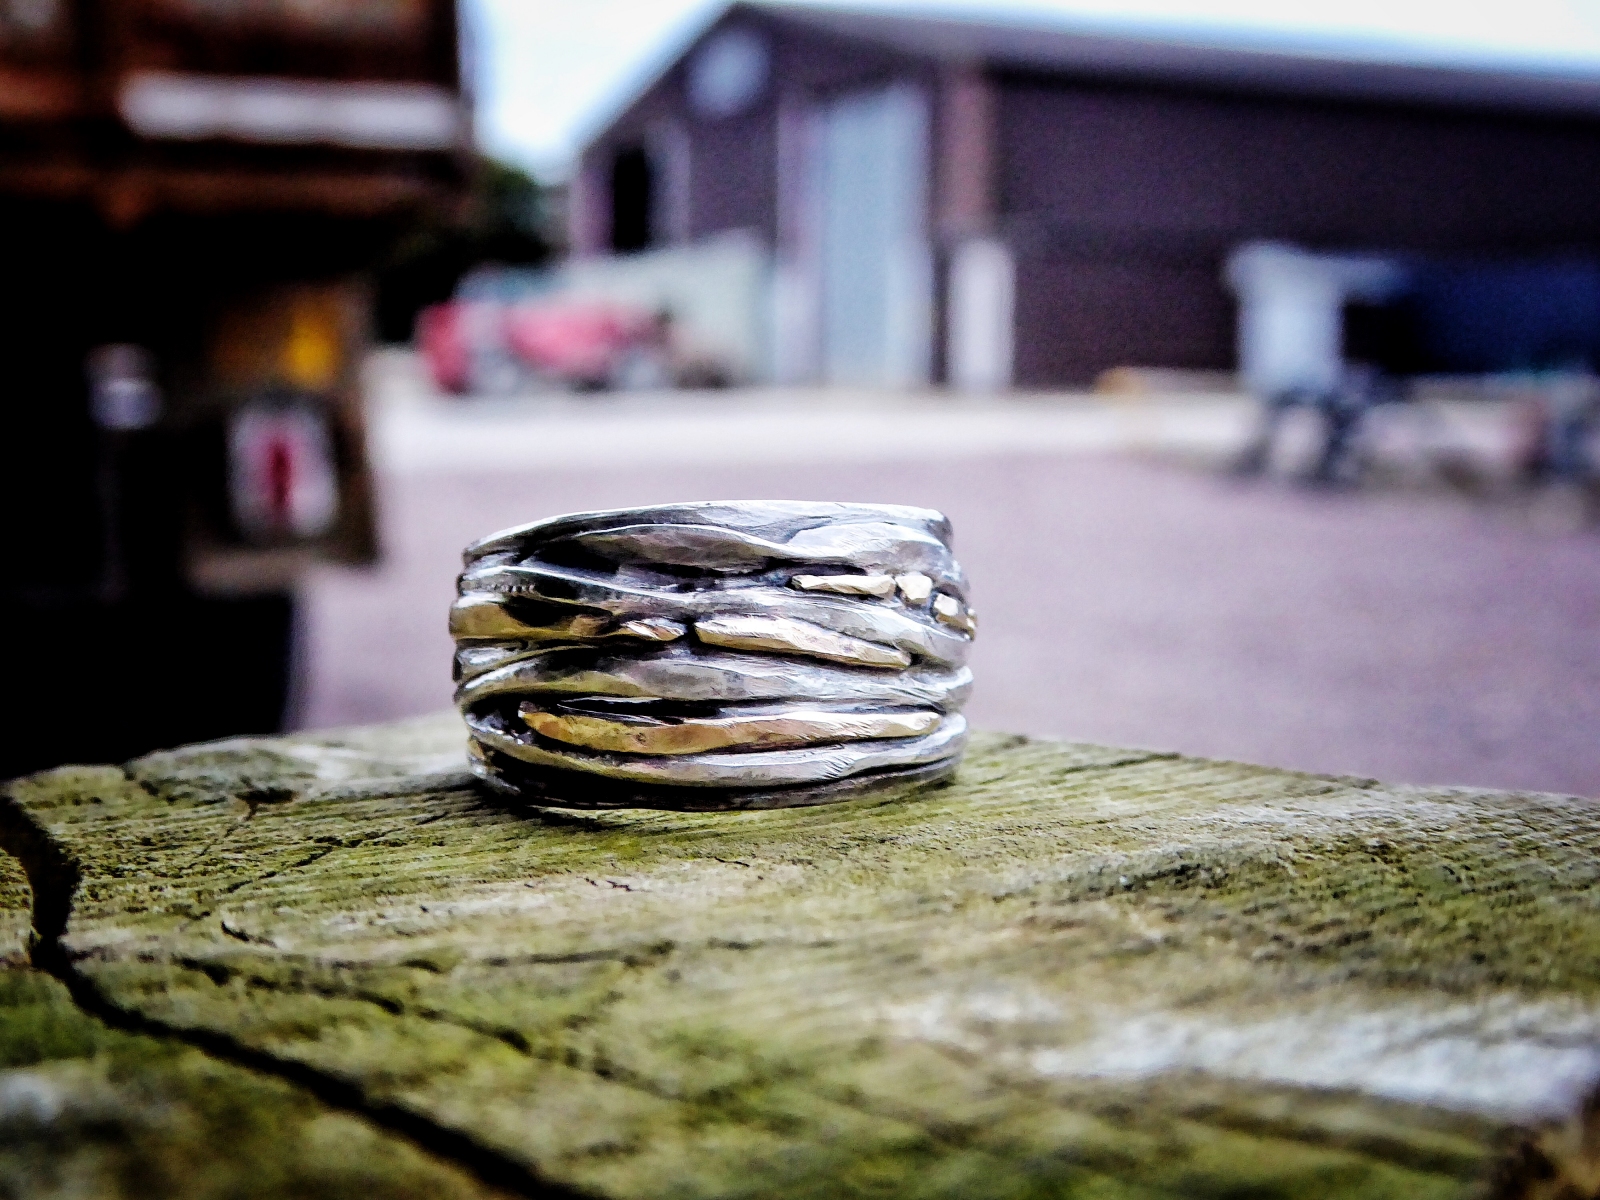 By Carol Clift - Hand beaten silver ring with 18ct yellow gold detail.